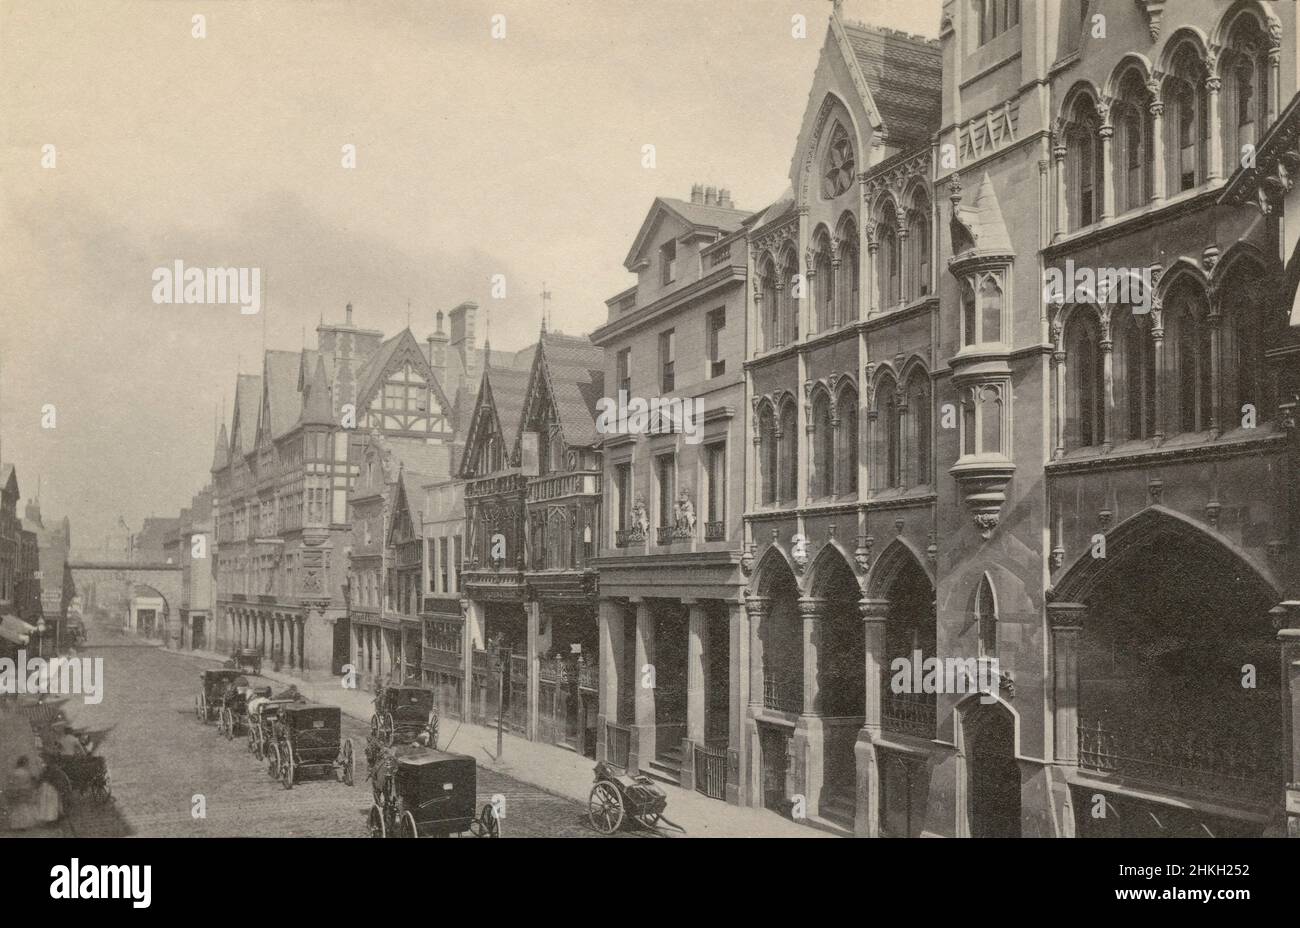 Antique circa 1890 photograph of downtown Eastgate Street with clock and arch in Chester, England. SOURCE: ORIGINAL ALBUMEN PHOTOGRAPH Stock Photo